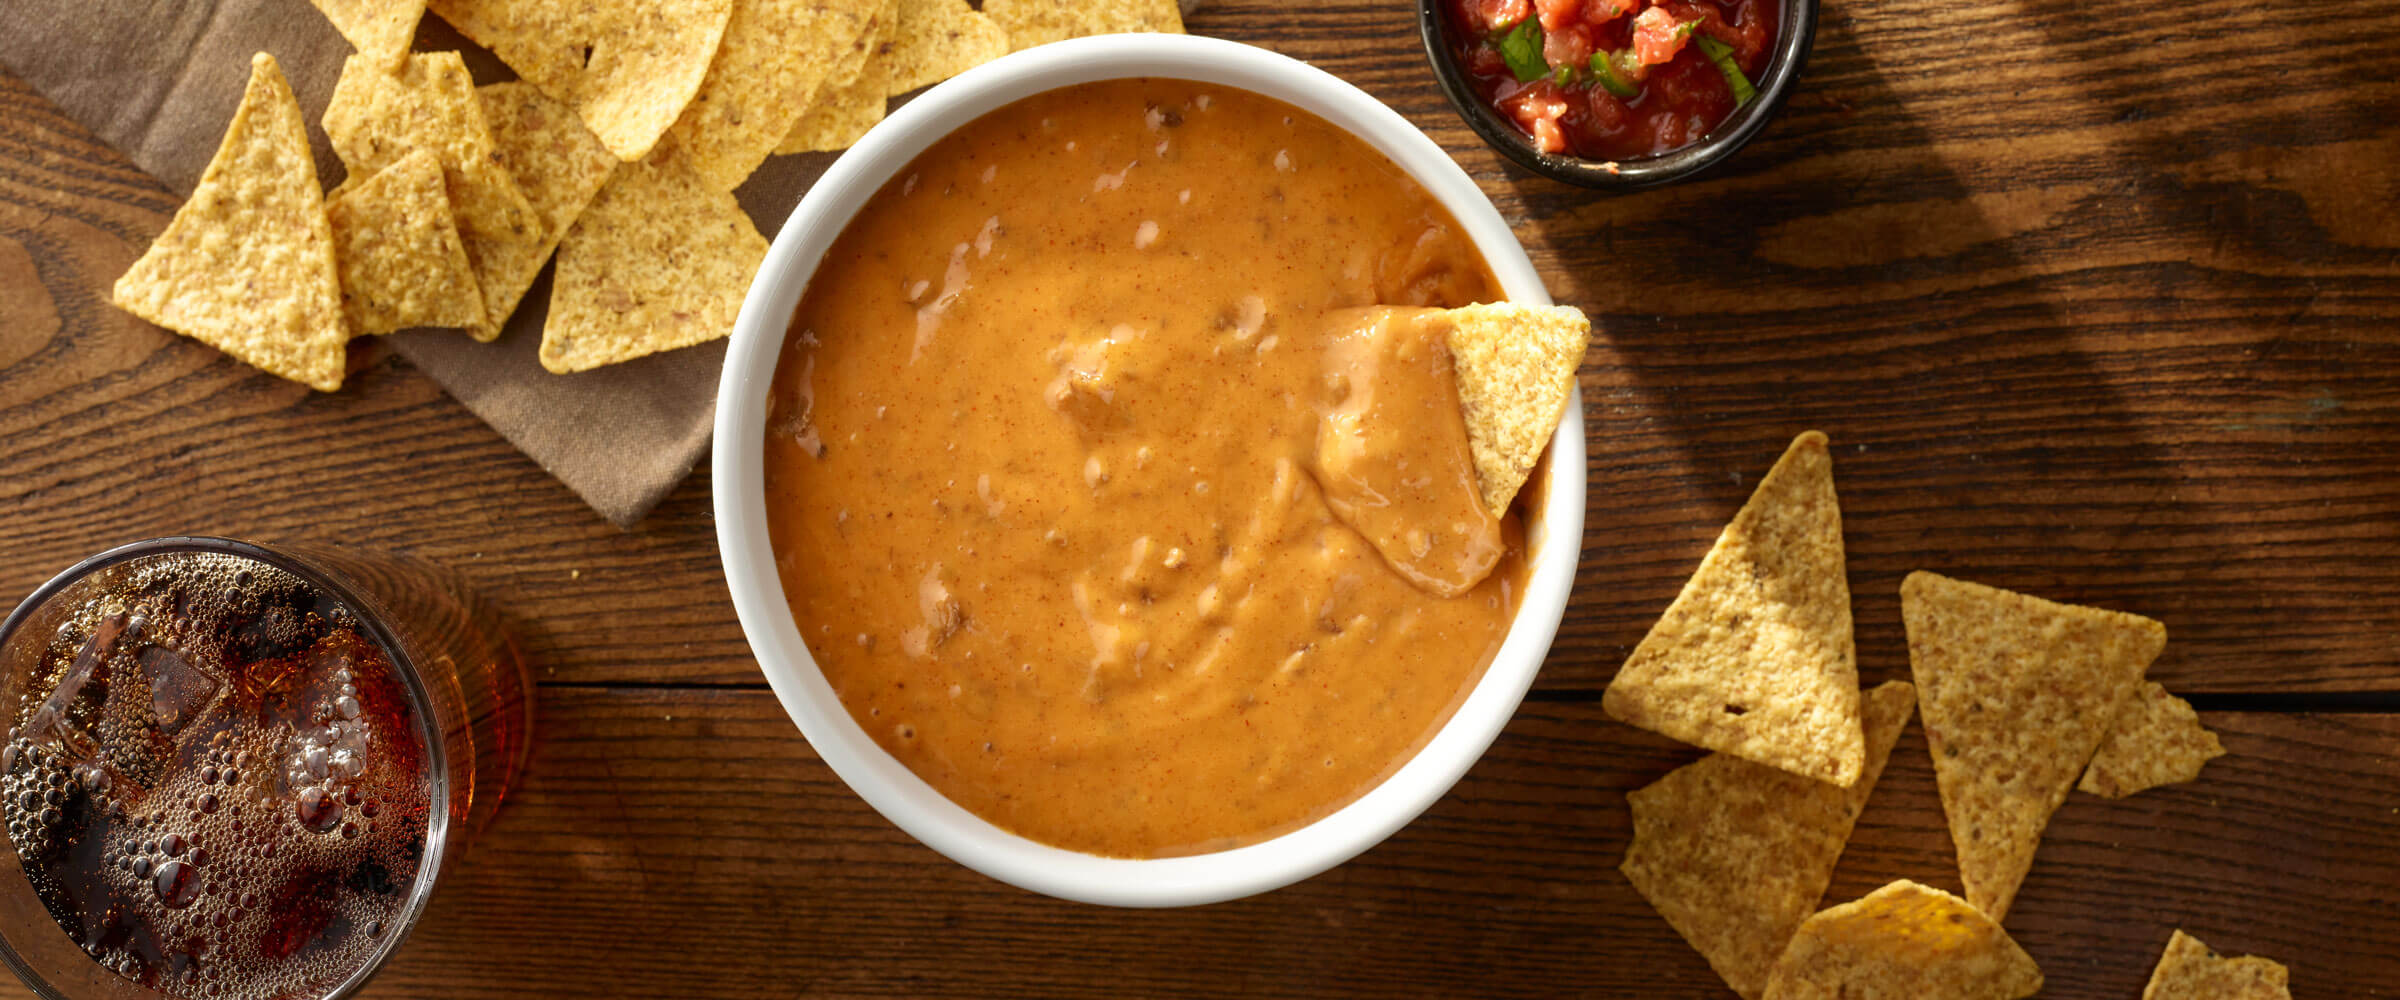 Chili Cheese Dip in white bowl with chips for dipping